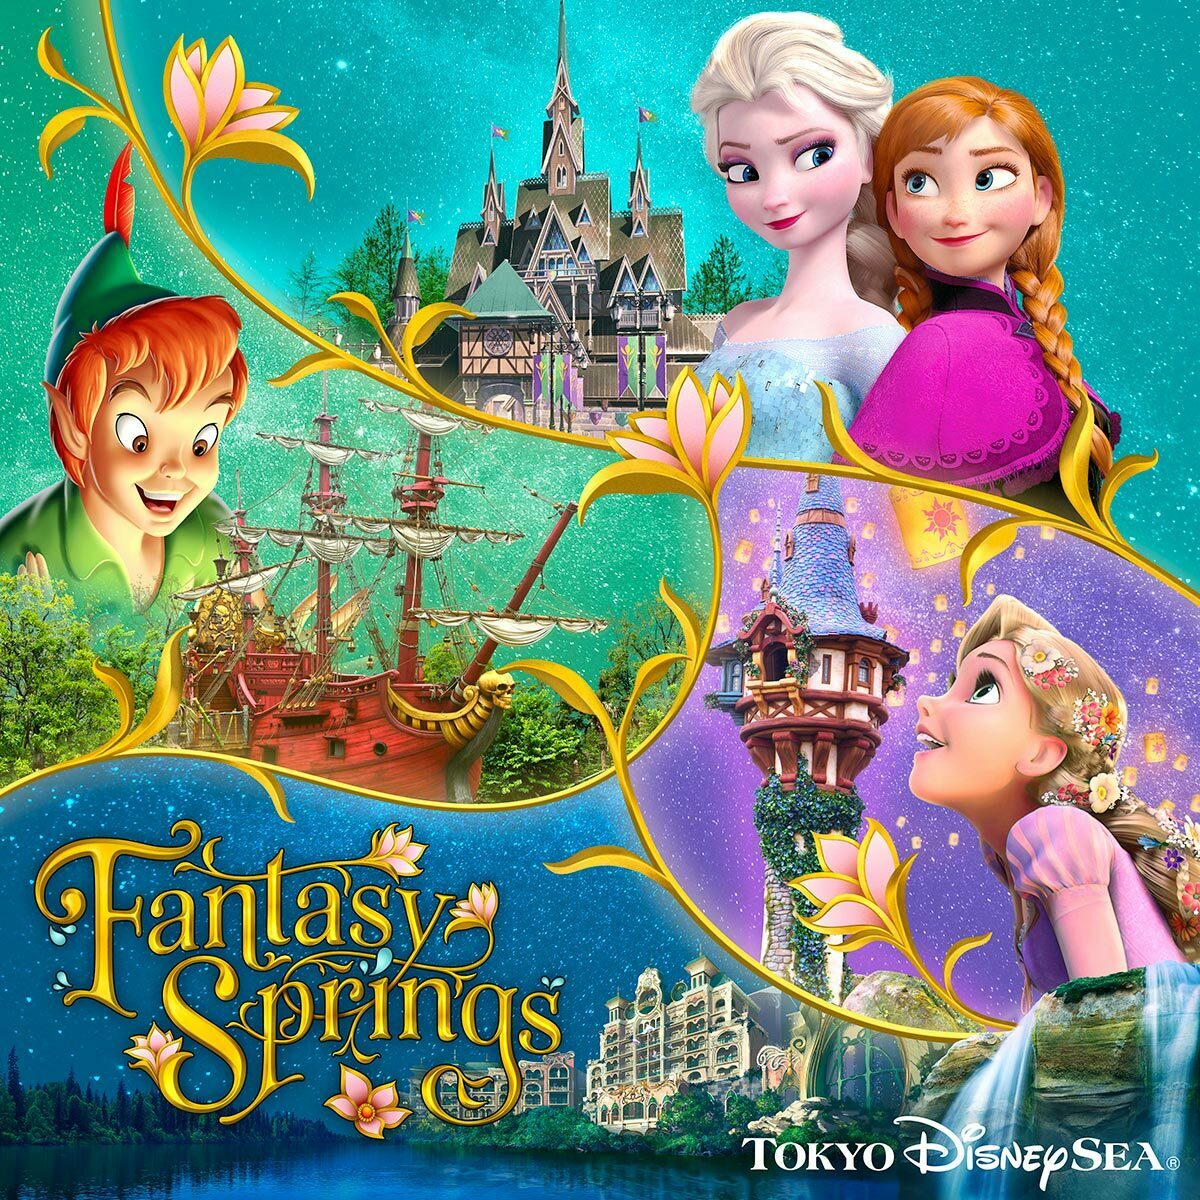 We’re LIVE From Fantasy Springs! Check Out Disney’s NEW Peter Pan, Tangled & Frozen Land!